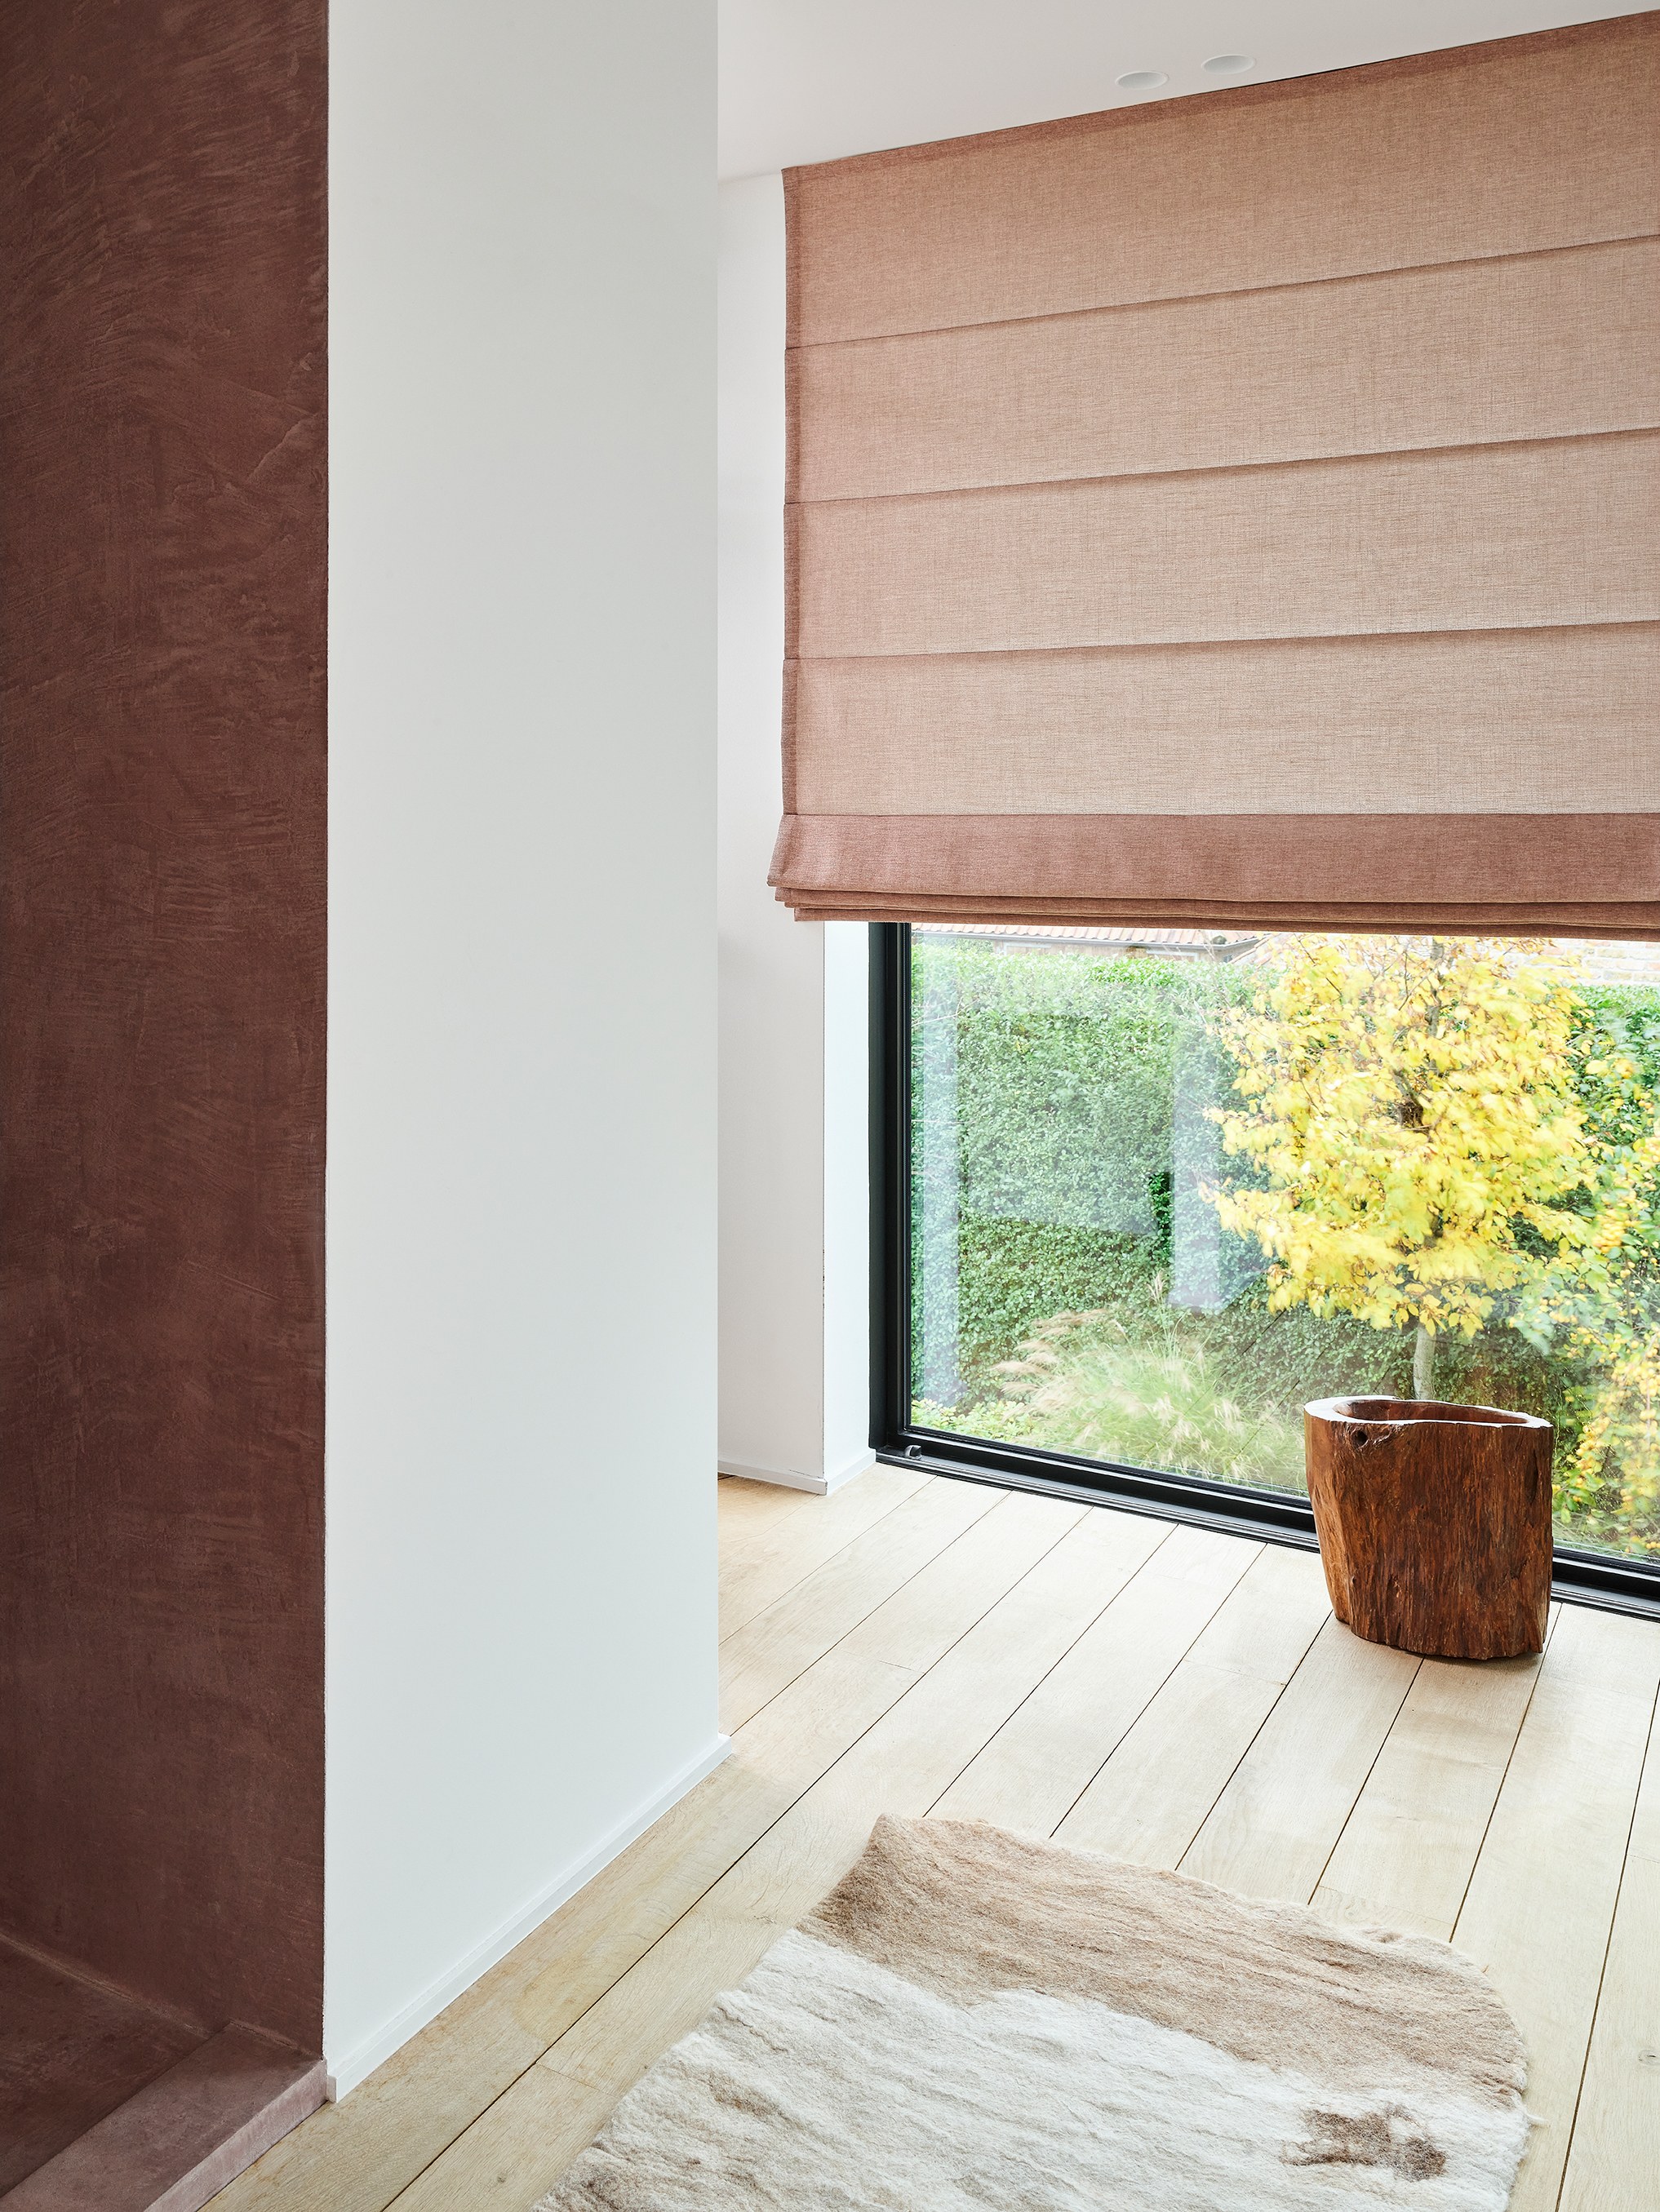 Inside Blinds - Fusion - curtain fabrics with integrated lining - high insulation value